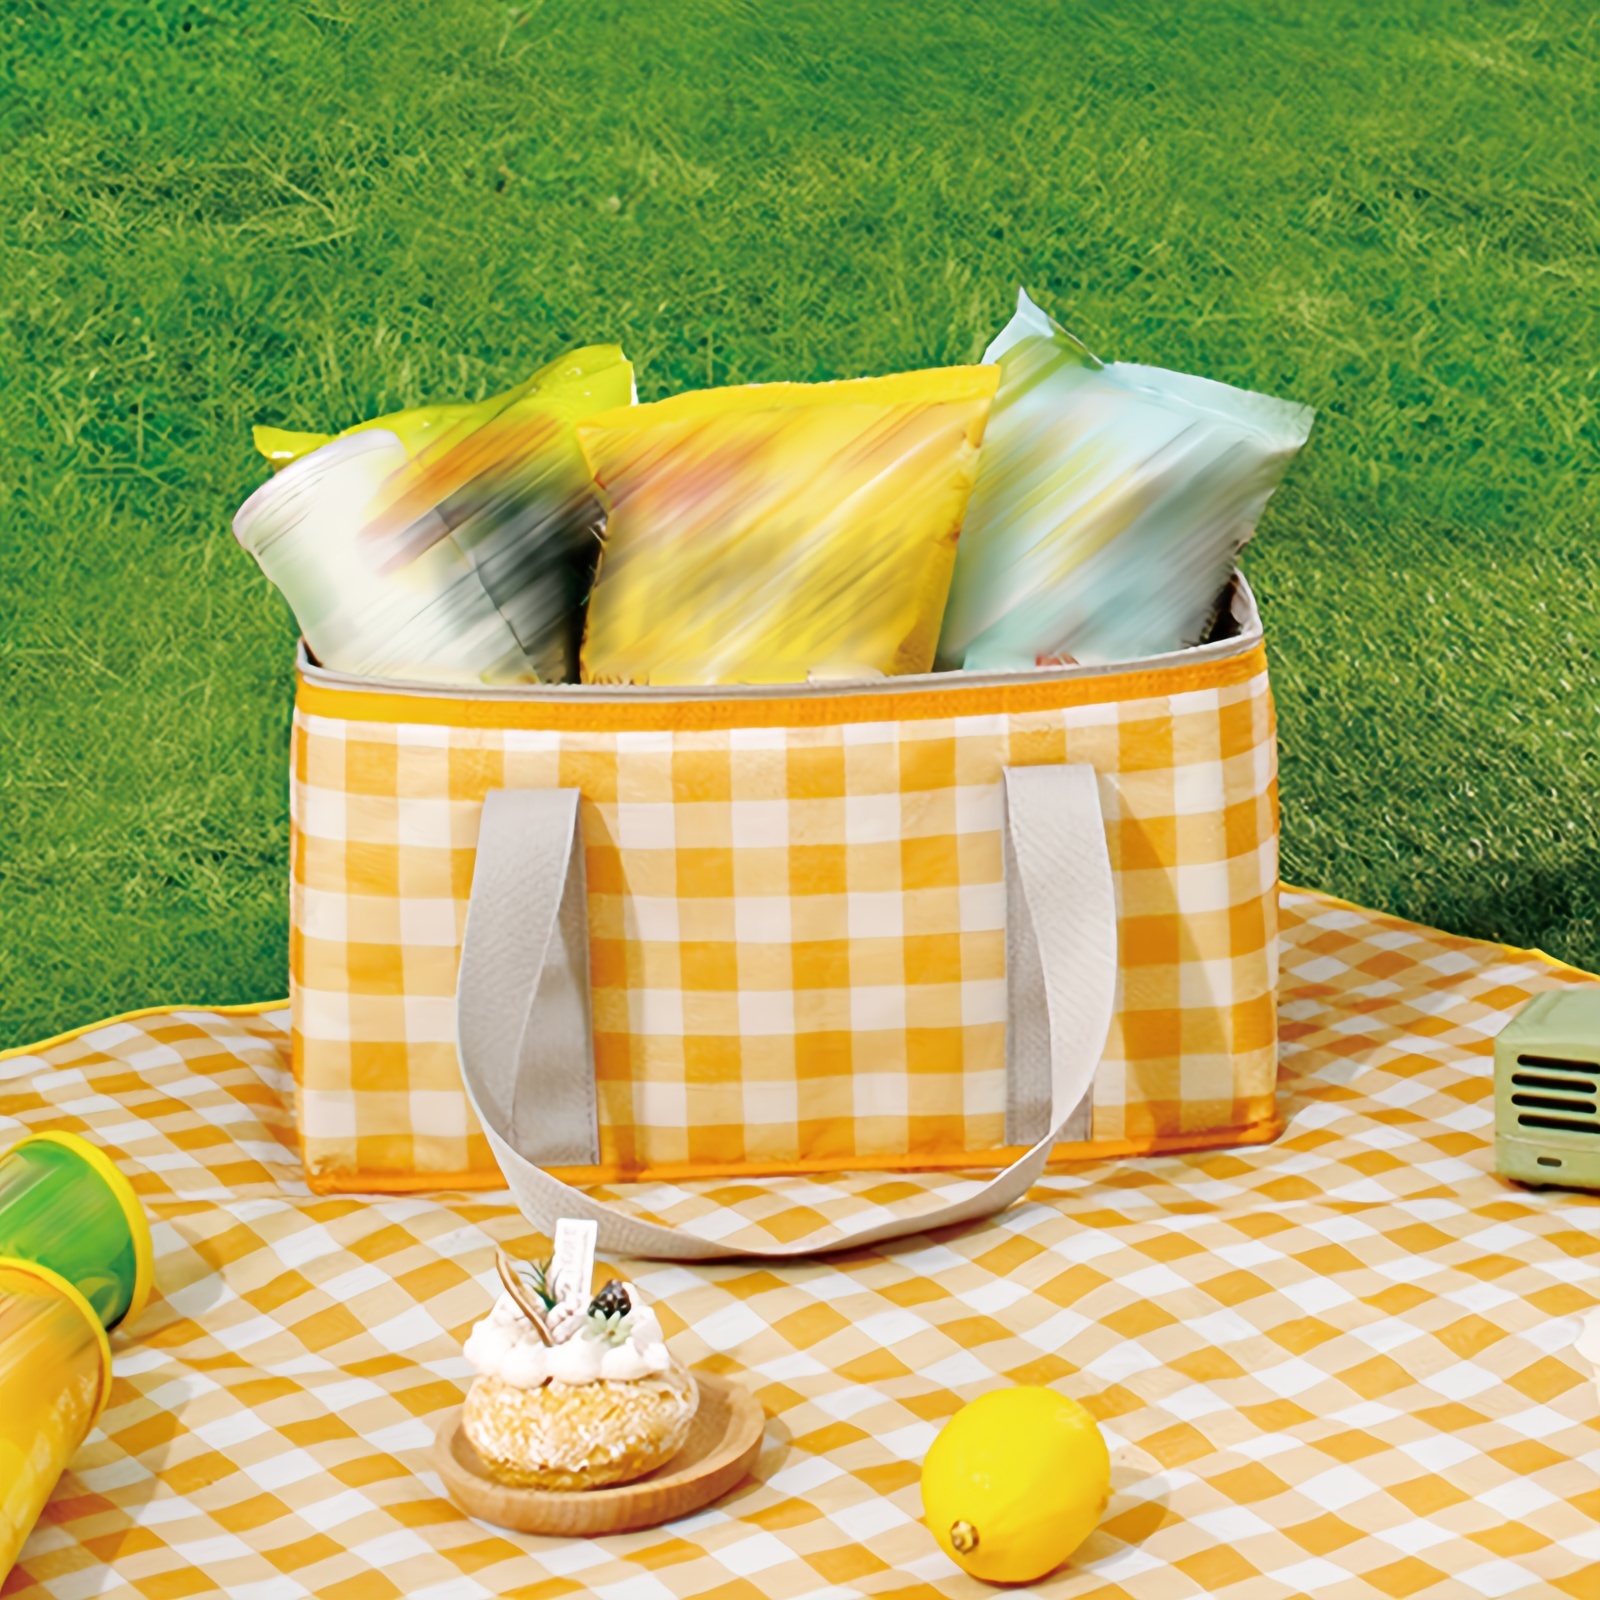 New Style Bubble Grid Insulation Bag, Waterproof Picnic Lunch Bag, Ice Bag,  Large Capacity Lunch Box Bag, For Camping Picnic Beach Essential, For  Teenagers And Workers At School, Classroom, Canteen, Back School 